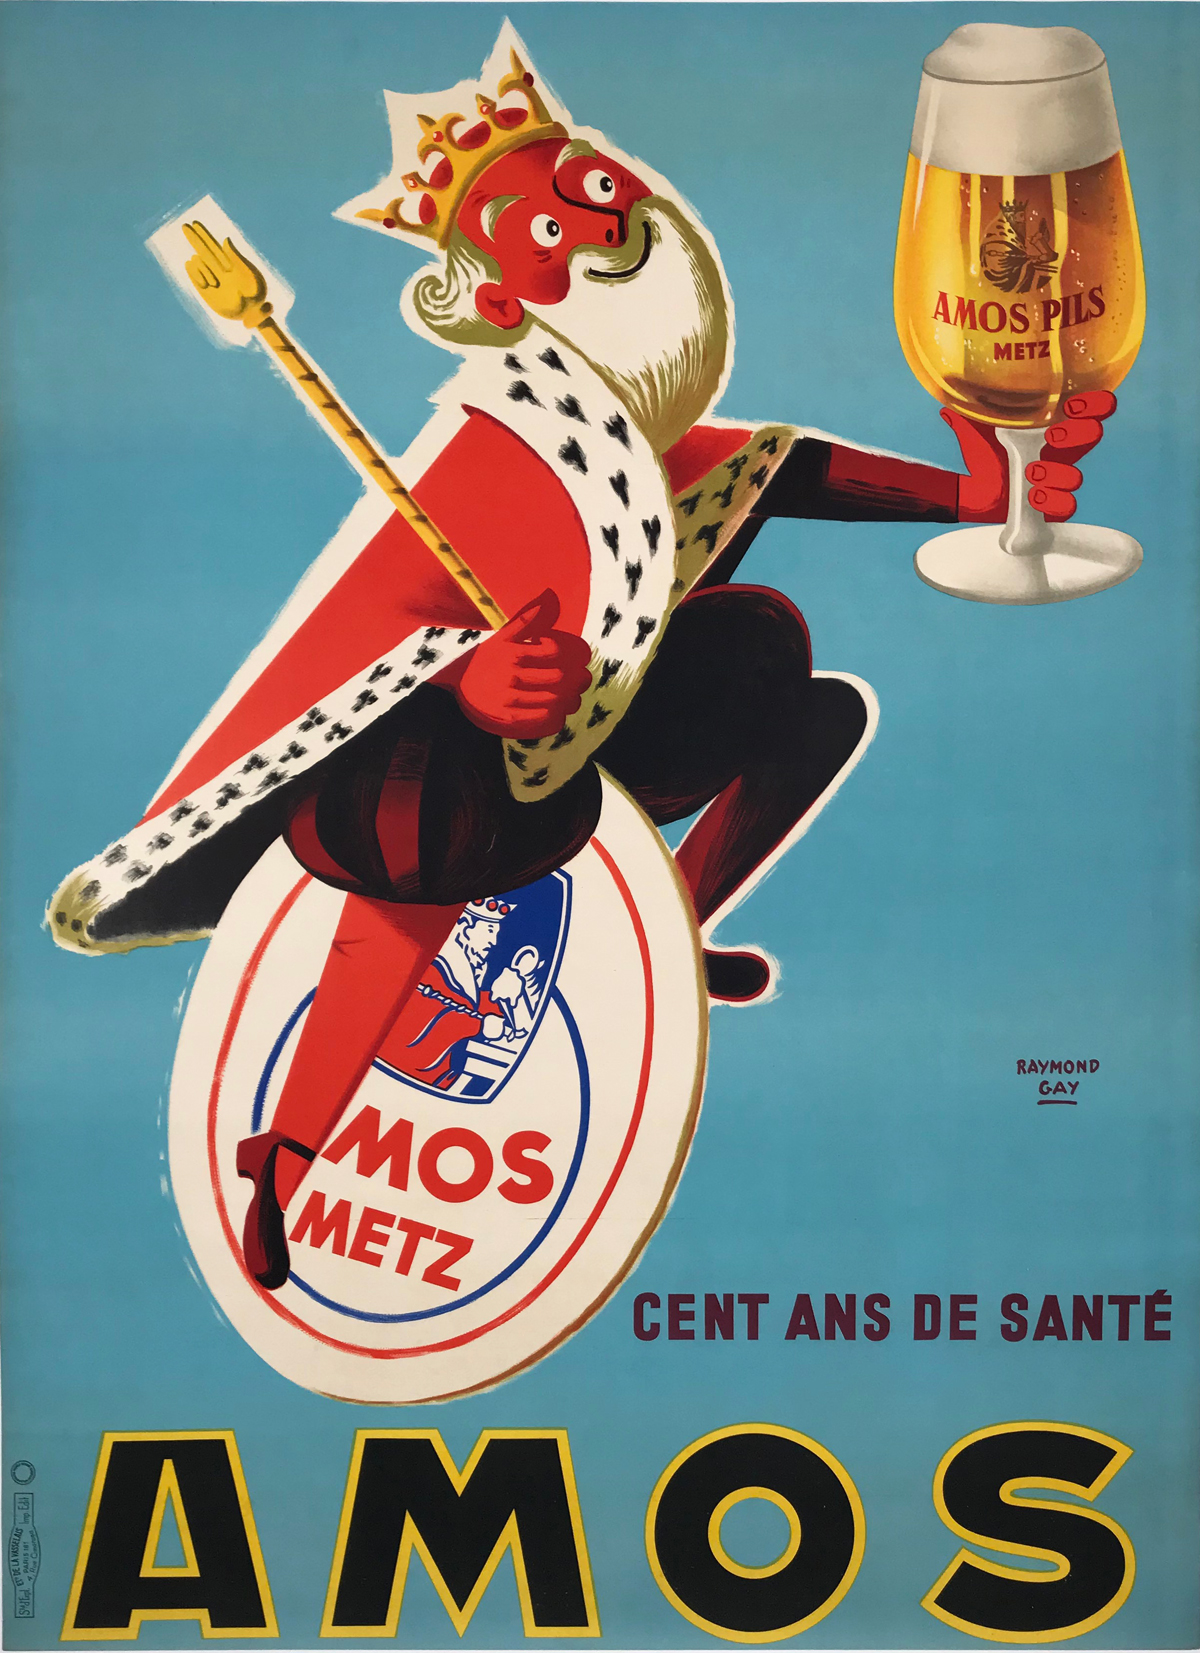 Amos Pils Metz by Raymond Guy Original 1952 Vintage French Beer Advertisement Linen Backed - This vertical French poster features a king in red robes smiling as he holds up a glass of beer against a blue background. Original Antique Posters.